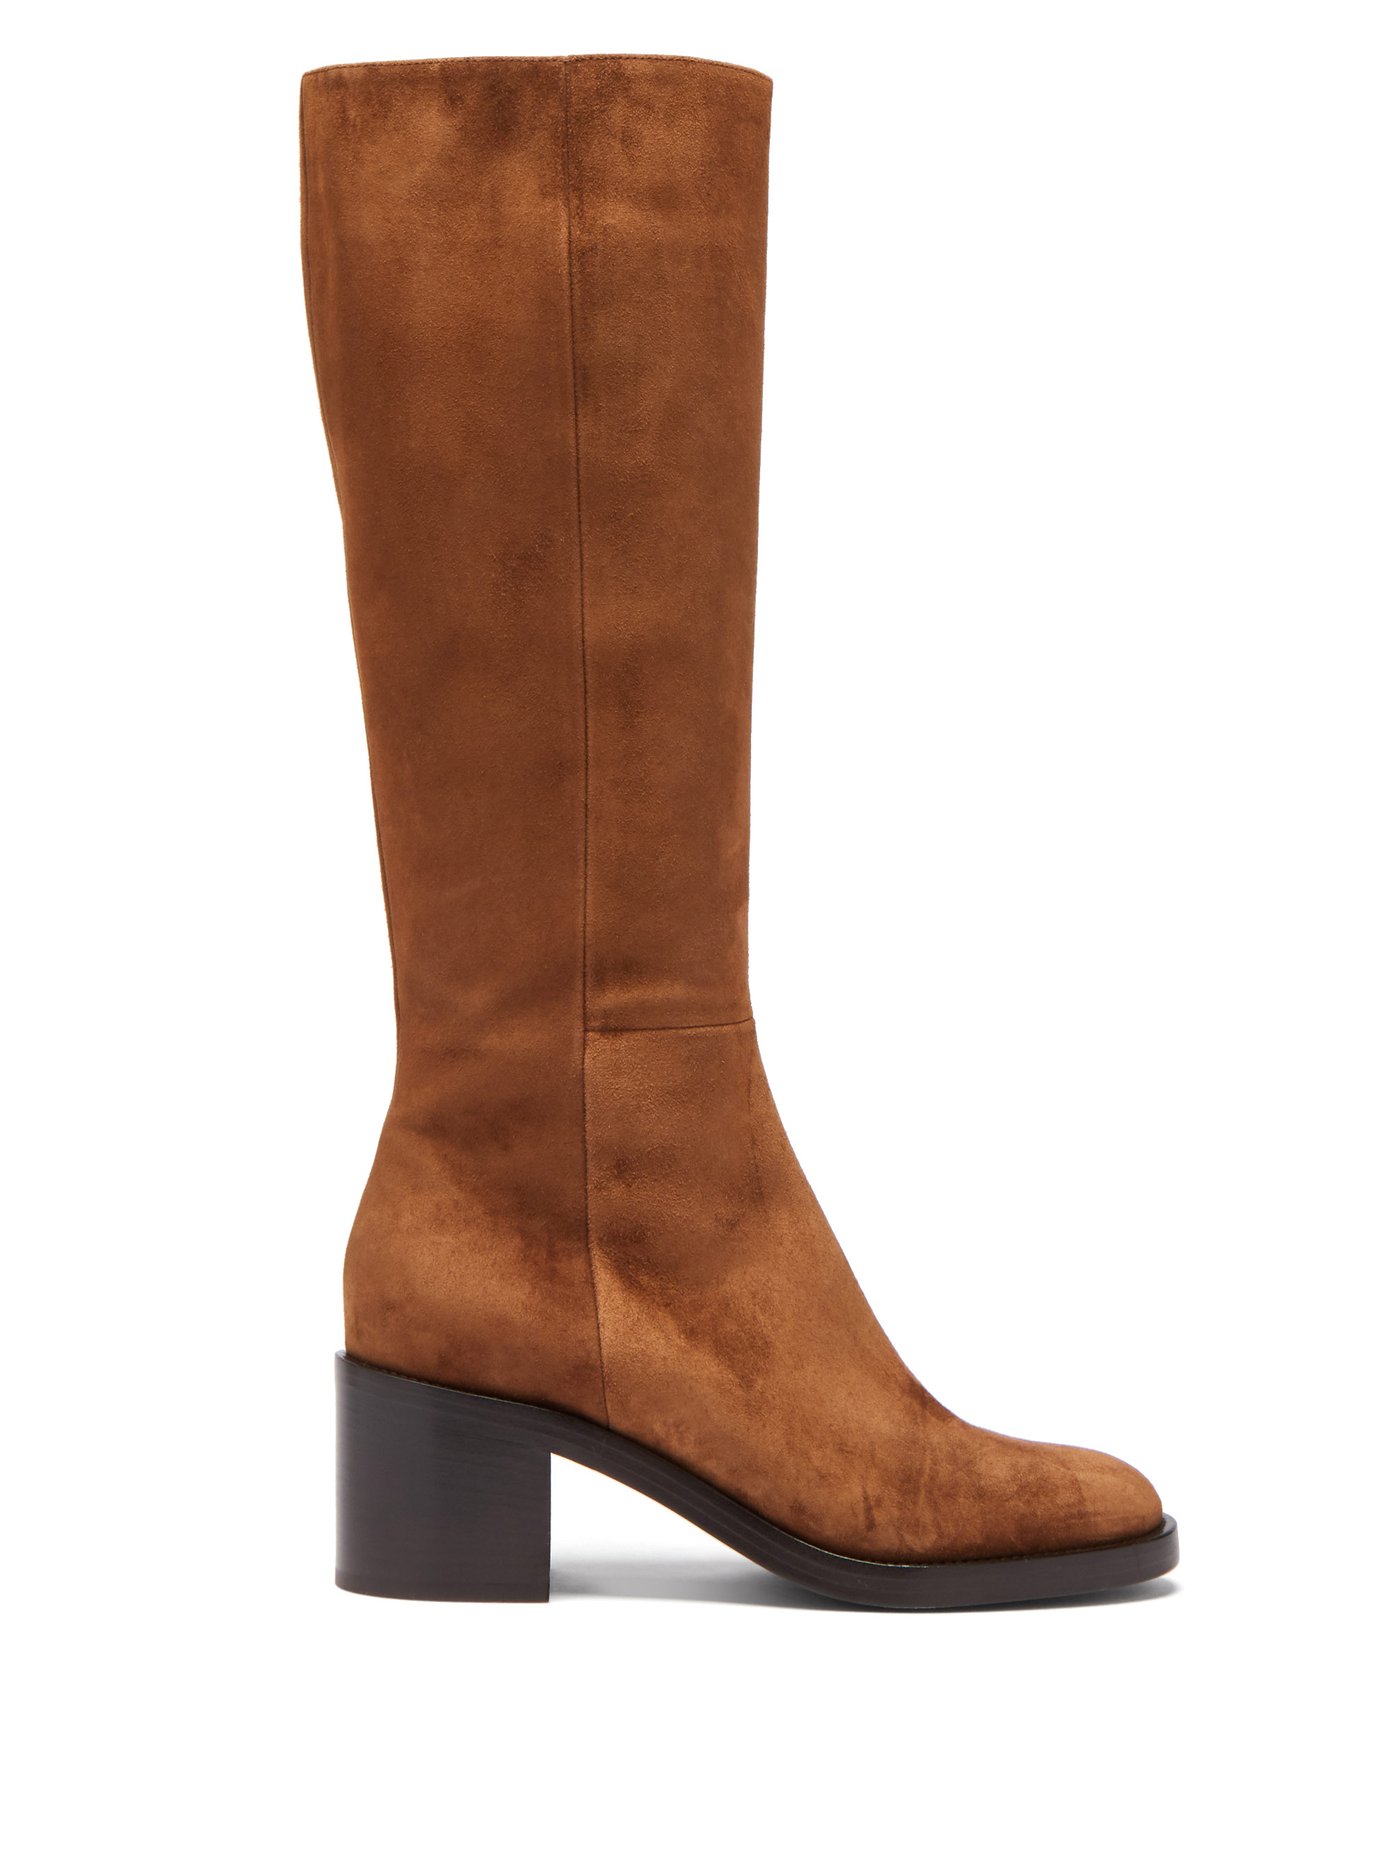 tan suede knee high boots